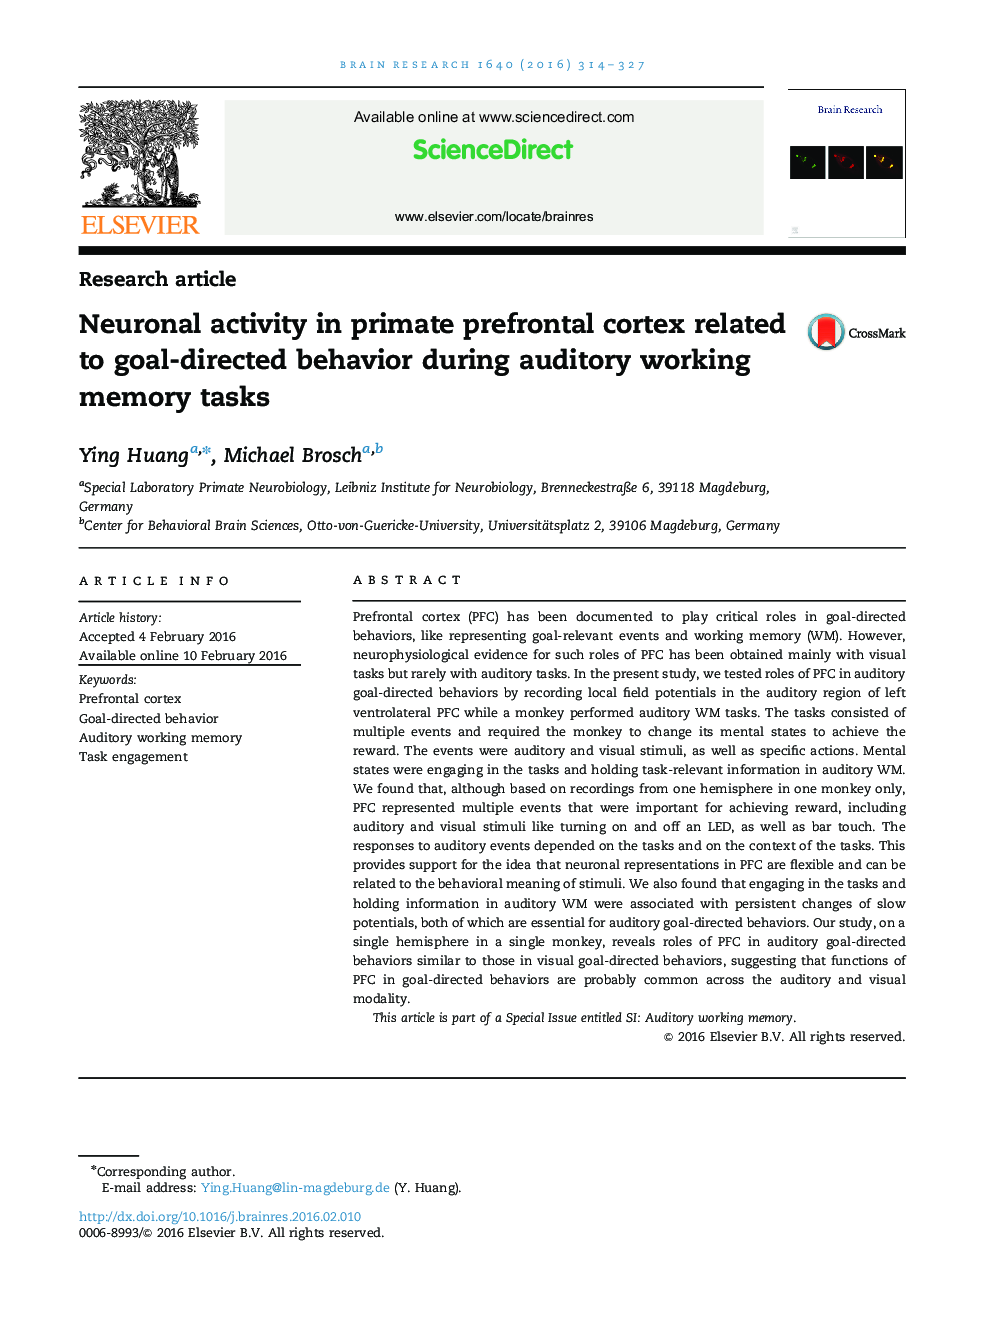 Research articleNeuronal activity in primate prefrontal cortex related to goal-directed behavior during auditory working memory tasks